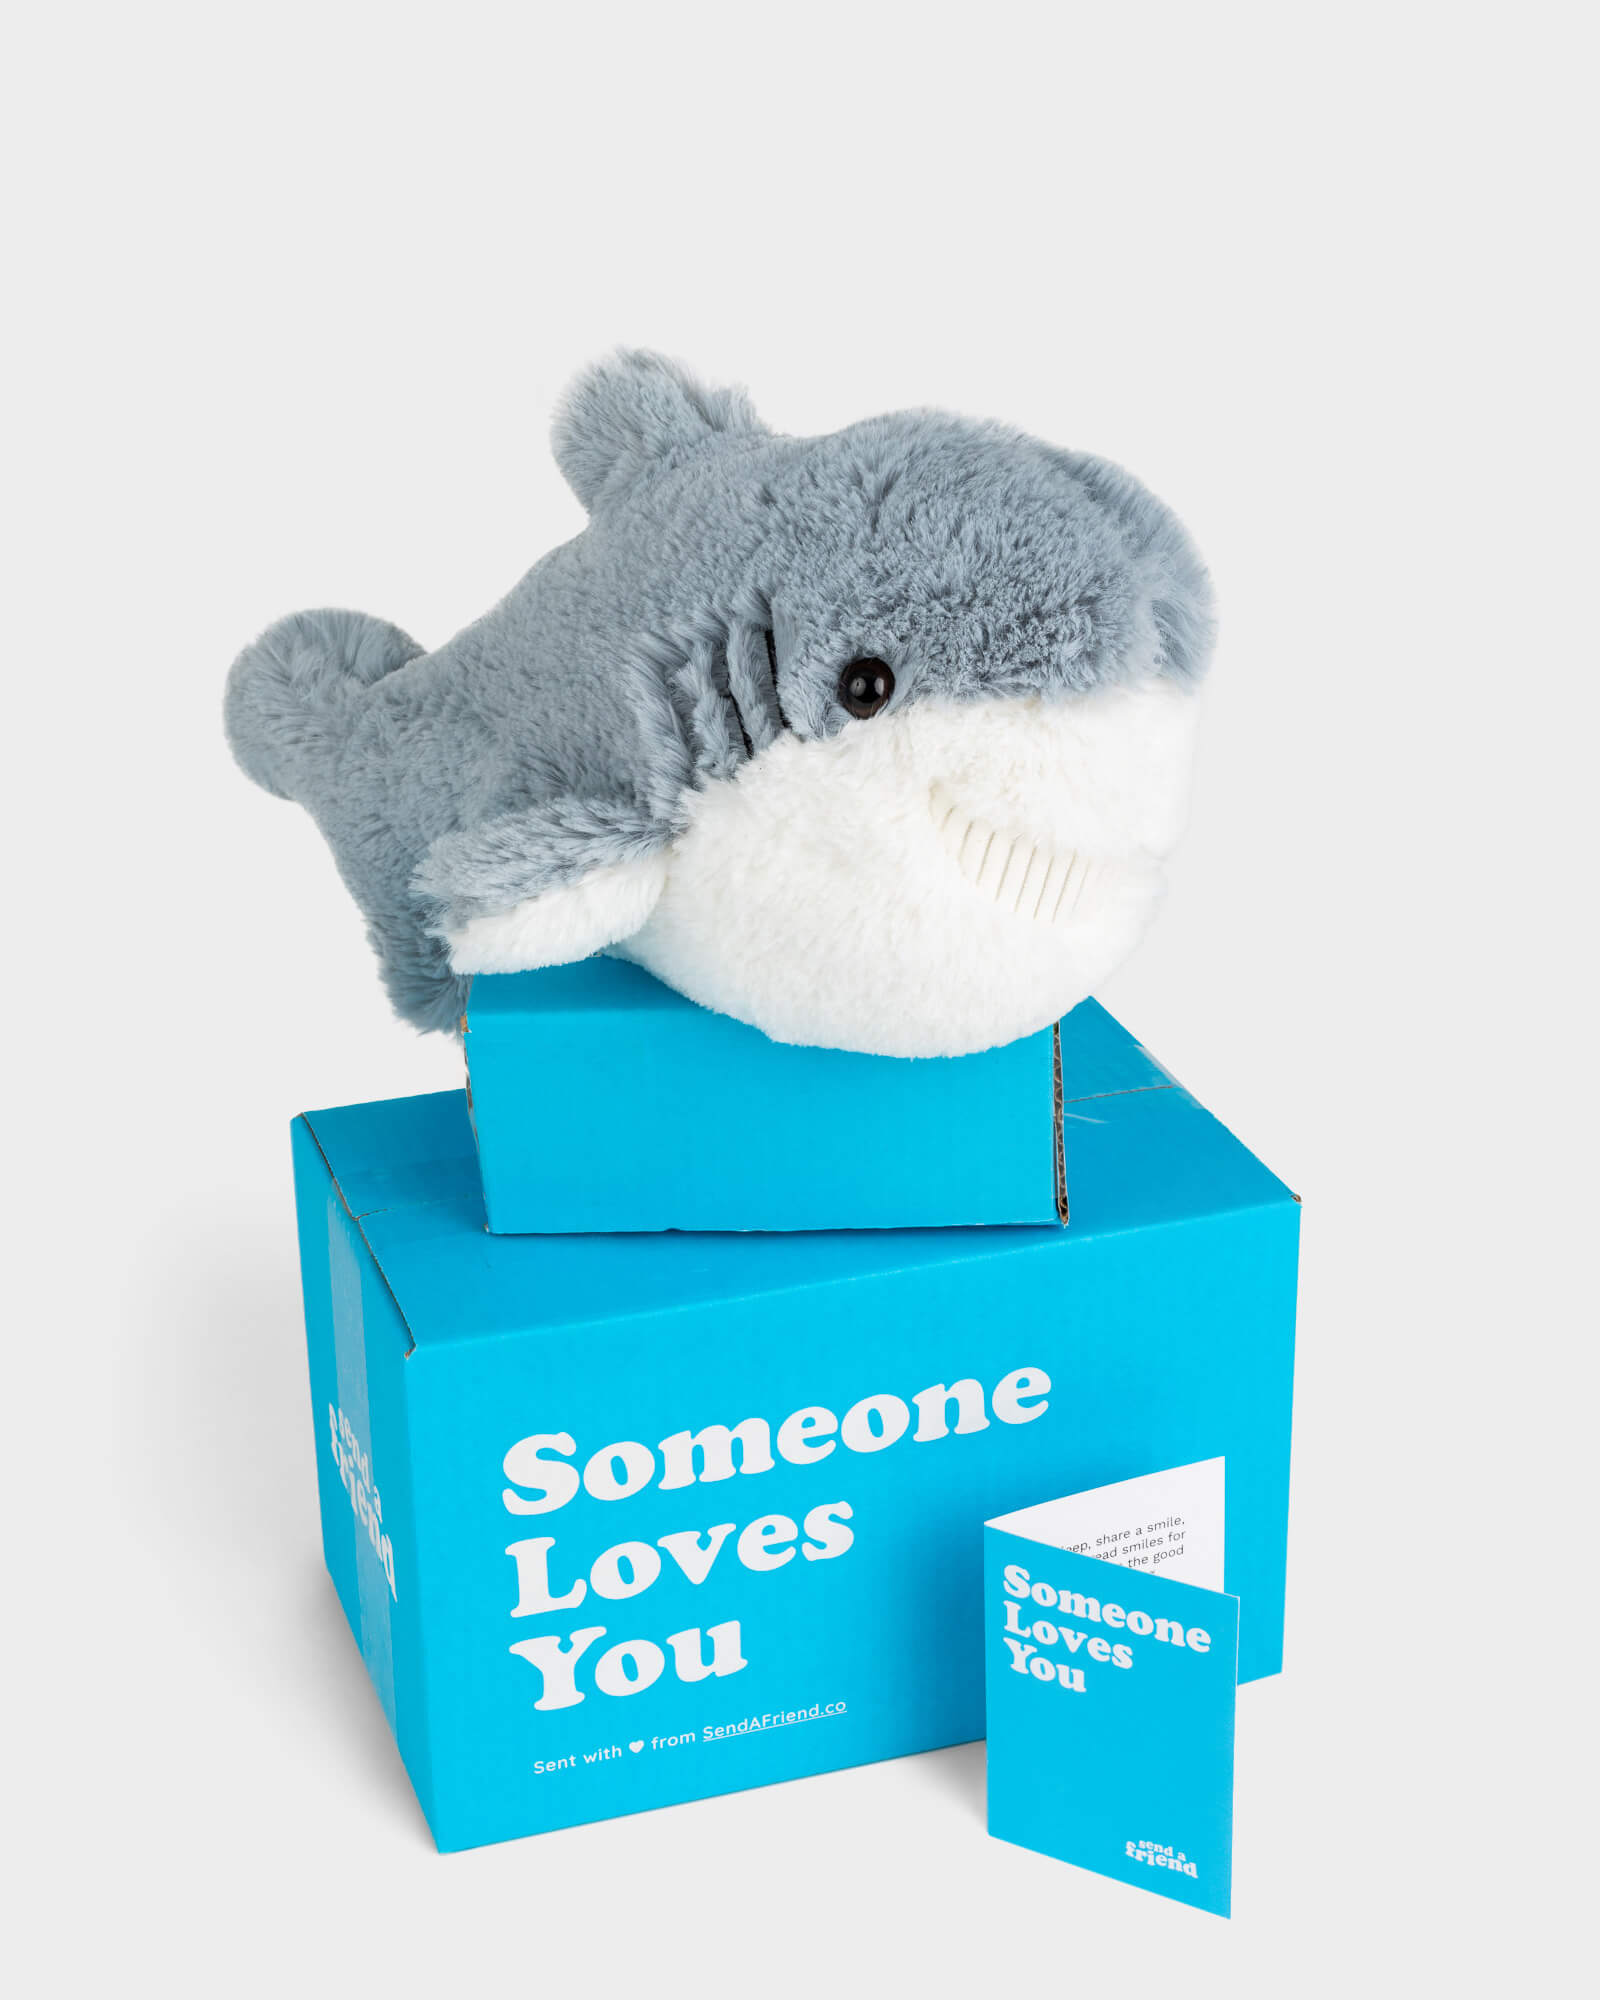 Grey shark plushie sitting on top of SendAFriend box and next to notecard both in signature blue color